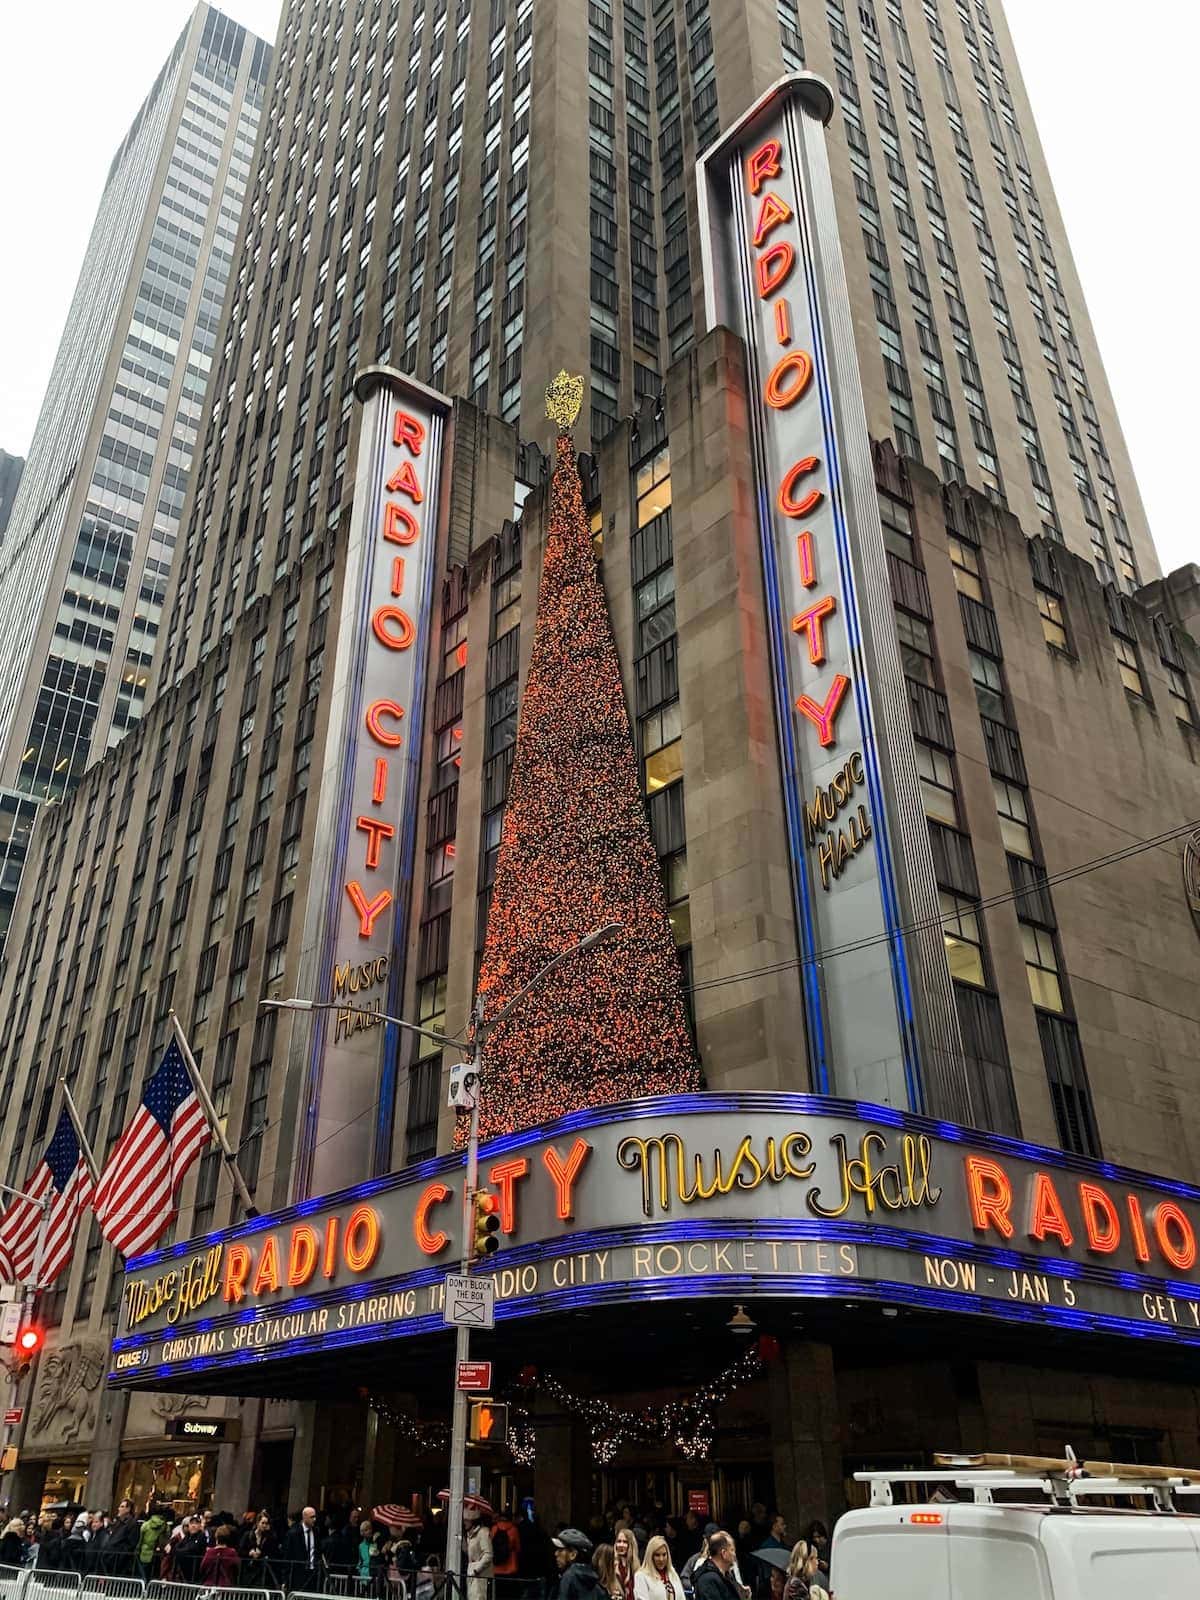 A group of people in a large city with Radio City Music Hall in the background